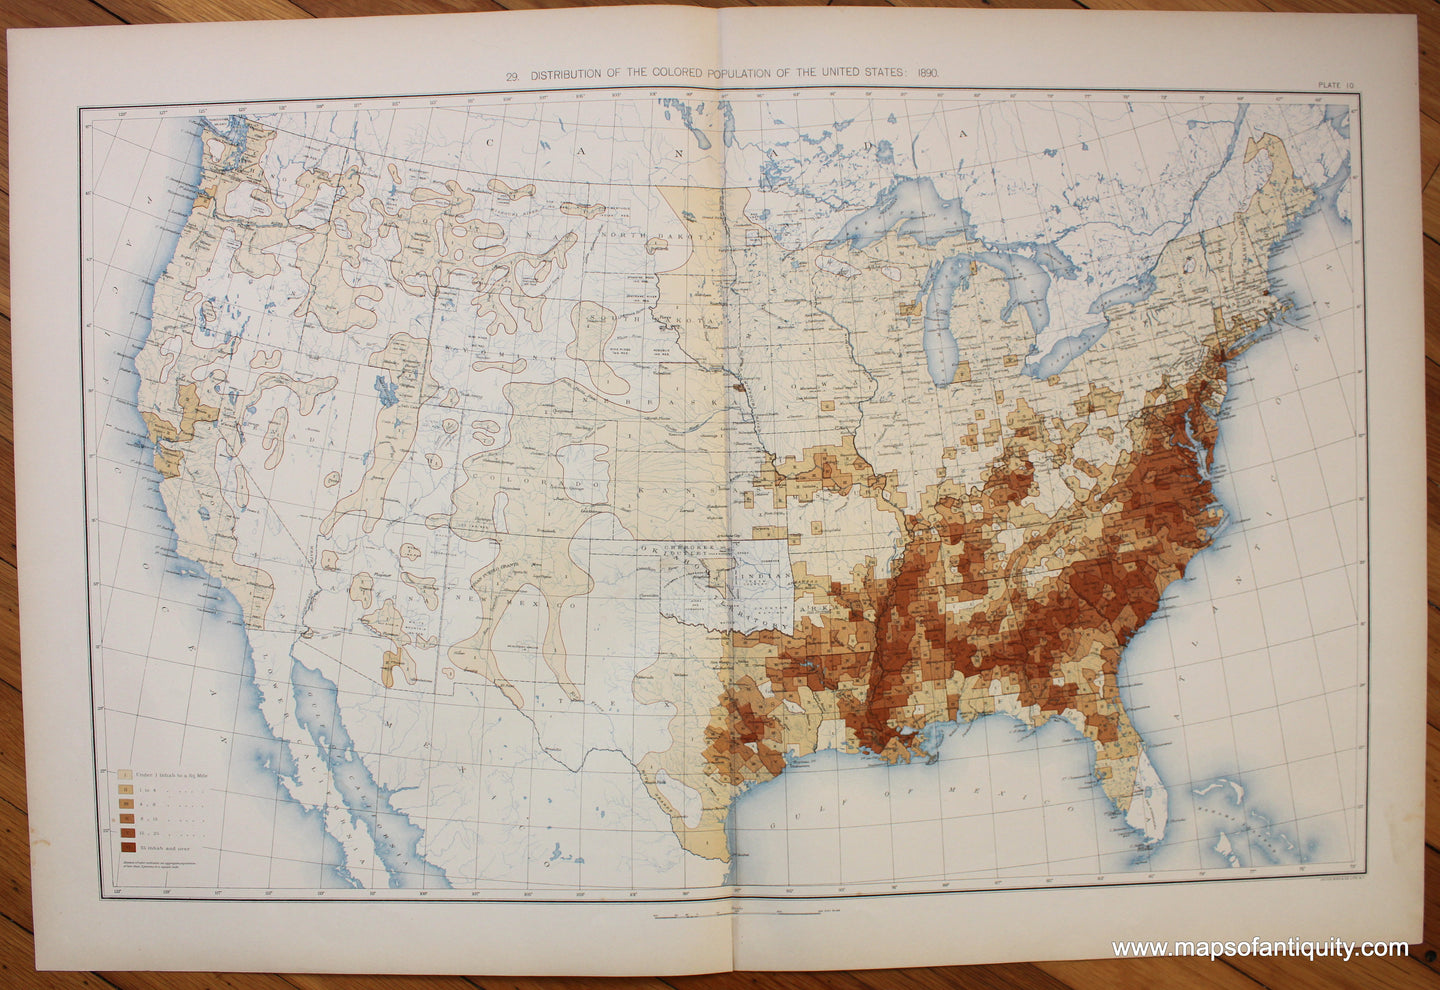 Maps-Antiquity-Antique-Map-Statistcal-Atlas-United-States-America-USA-1898-Eleventh-Census-Distribution-Colored-Aggregate-Population-1890-Gannett